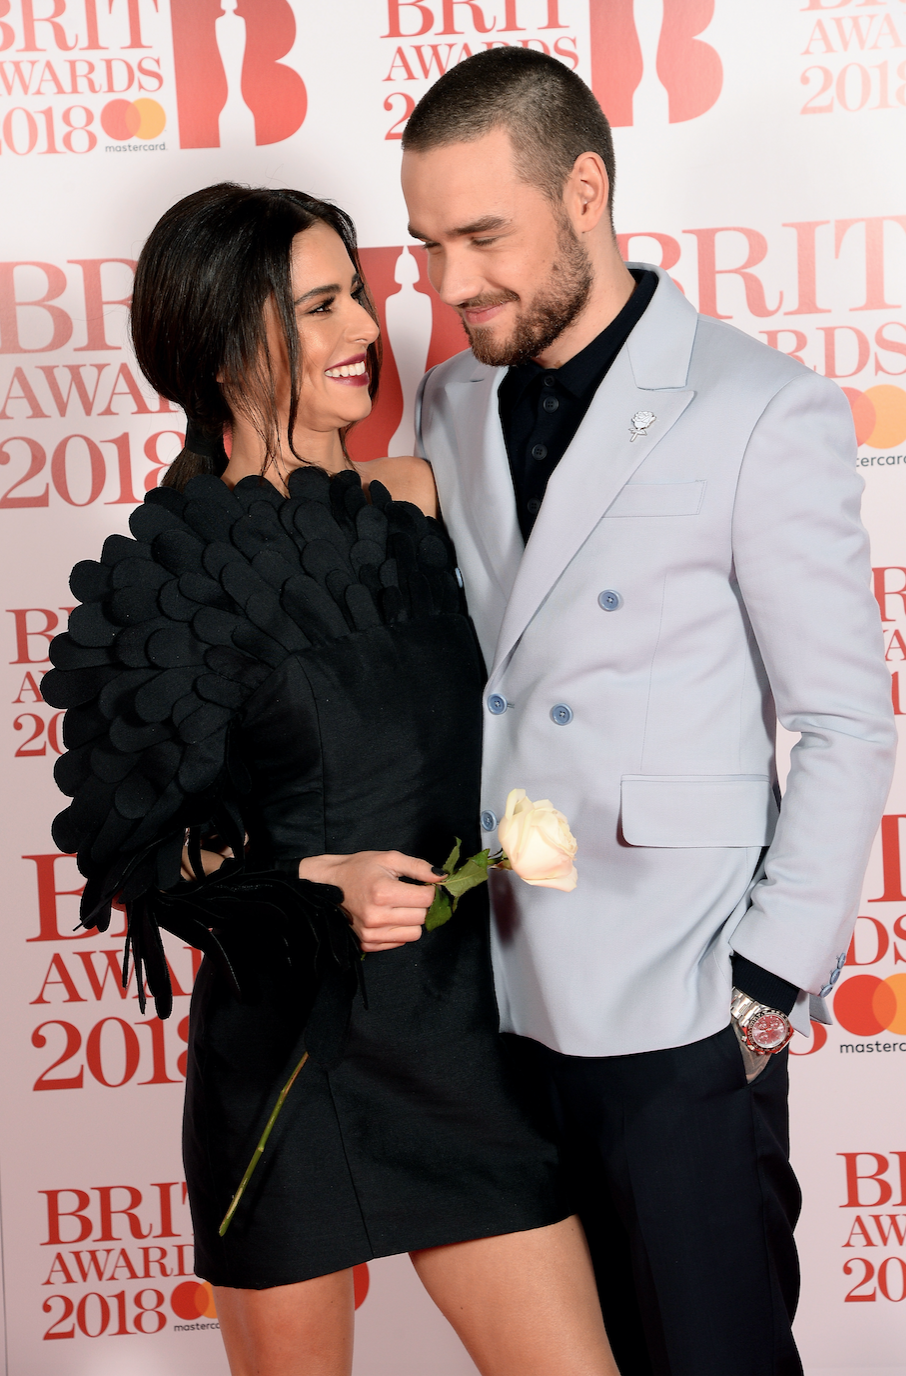 Cheryl (L) and Liam Payne attend The BRIT Awards 2018 held at The O2 Arena on February 21, 2018